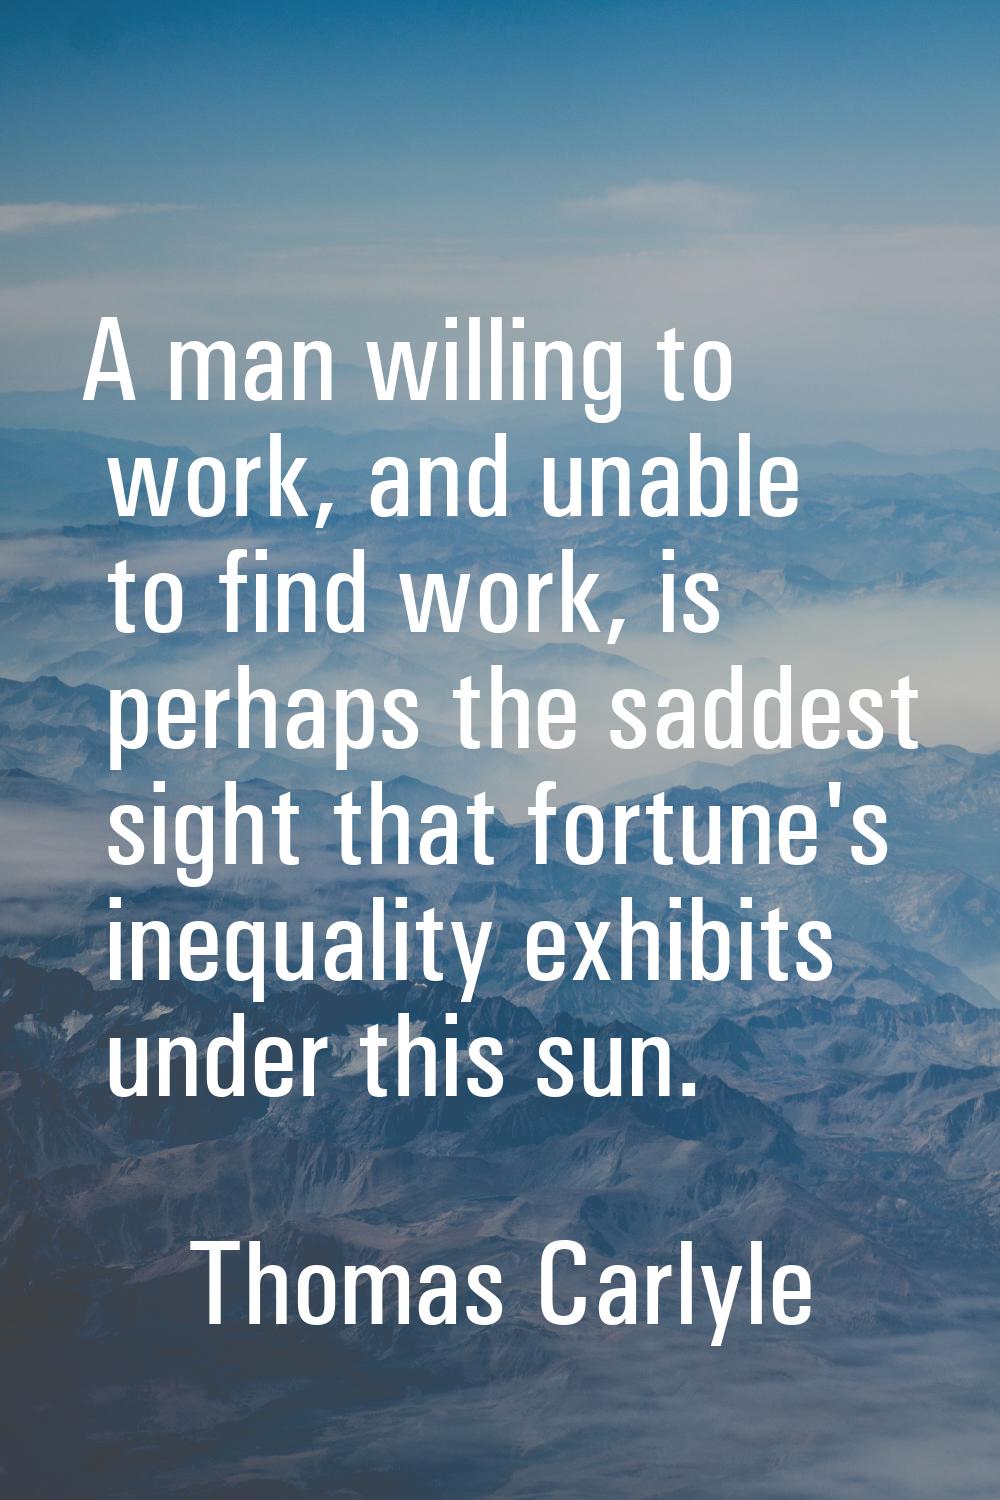 A man willing to work, and unable to find work, is perhaps the saddest sight that fortune's inequal